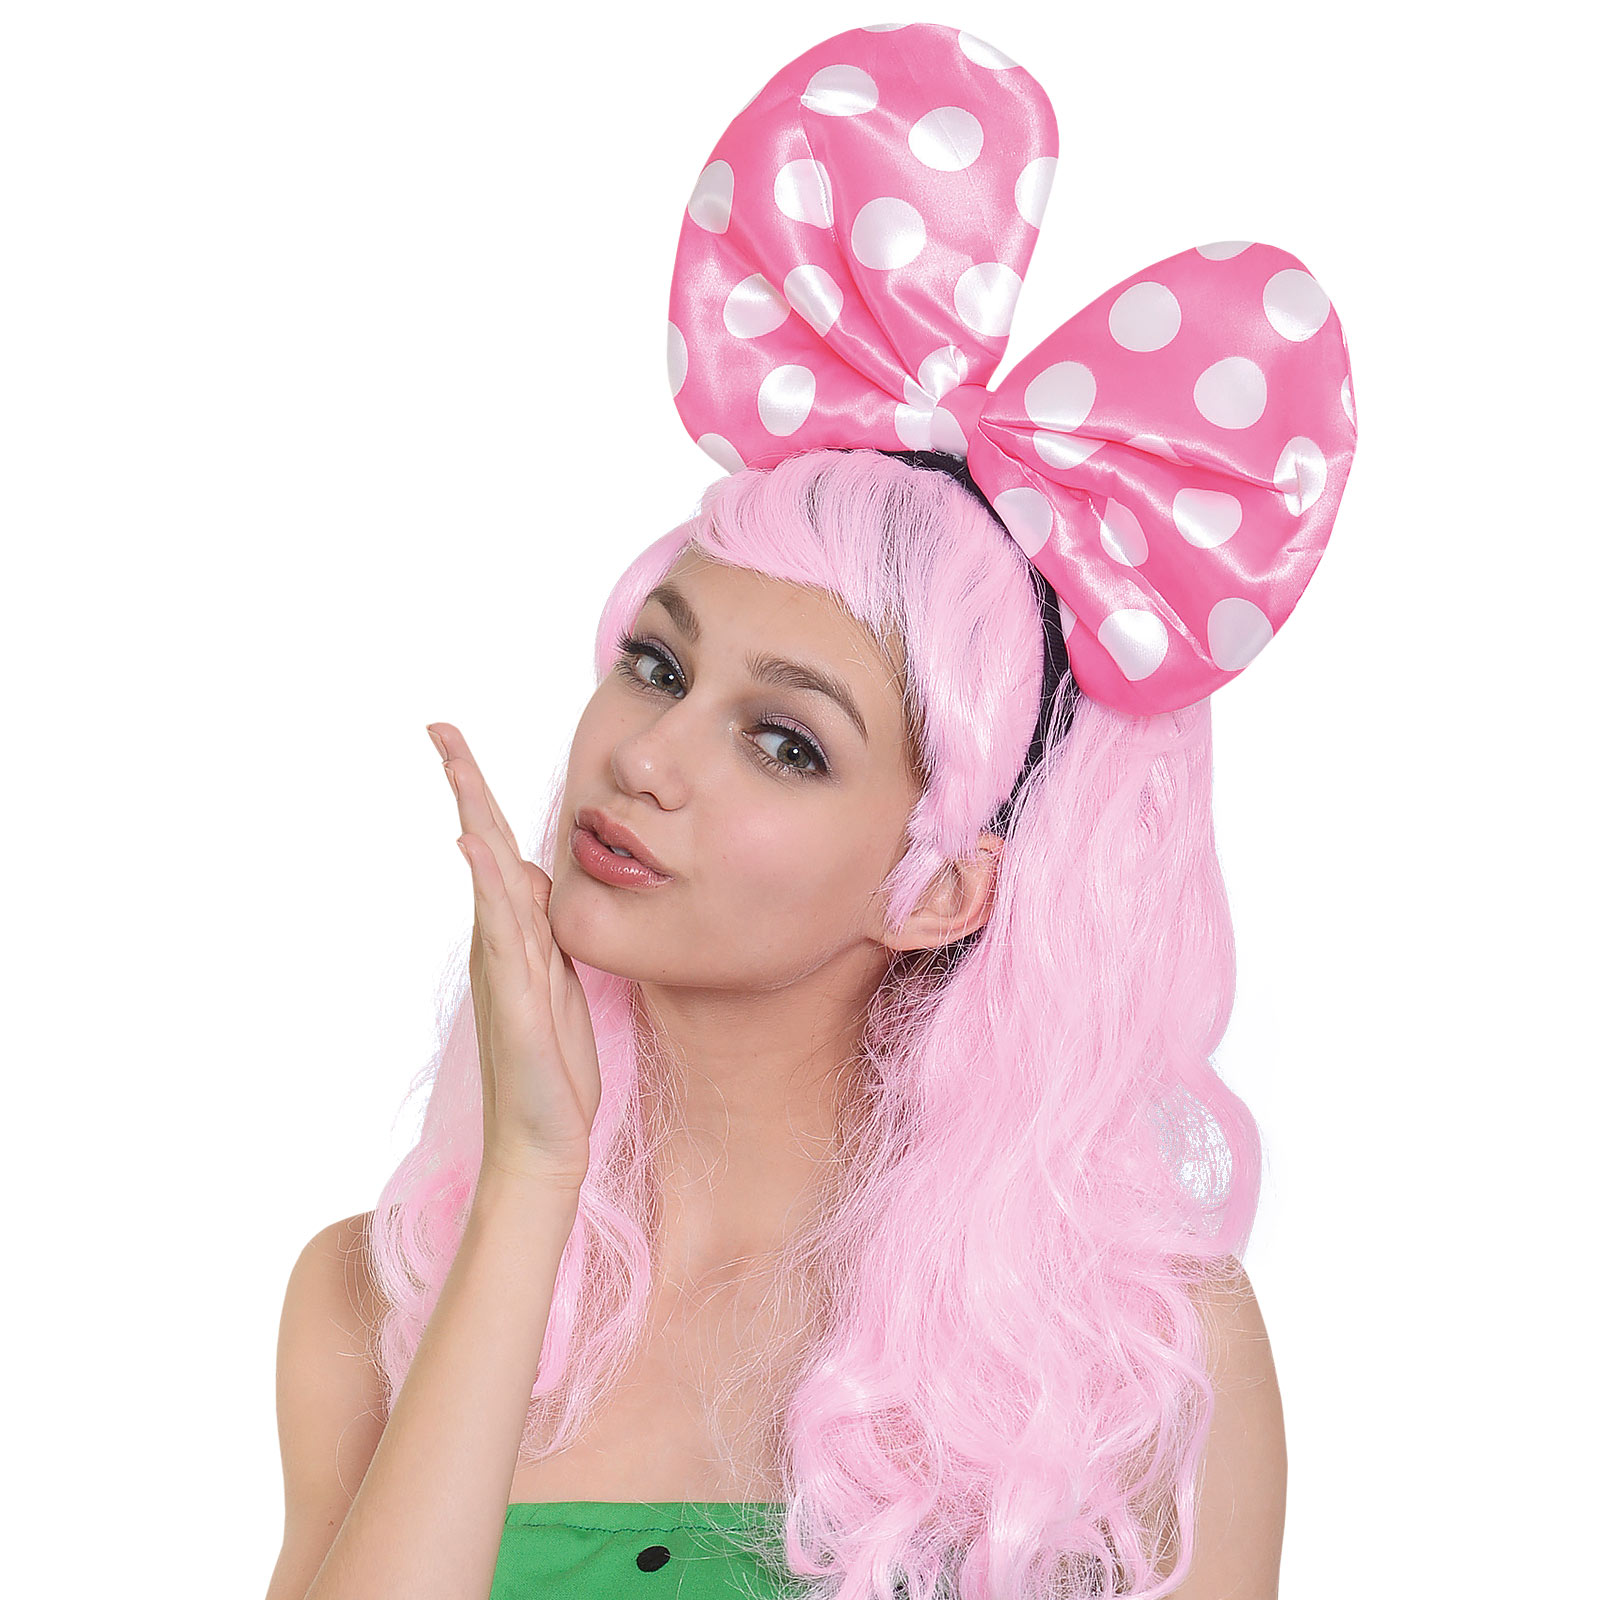 Sweetie - Long Hair Wig for Women with Pink Bow